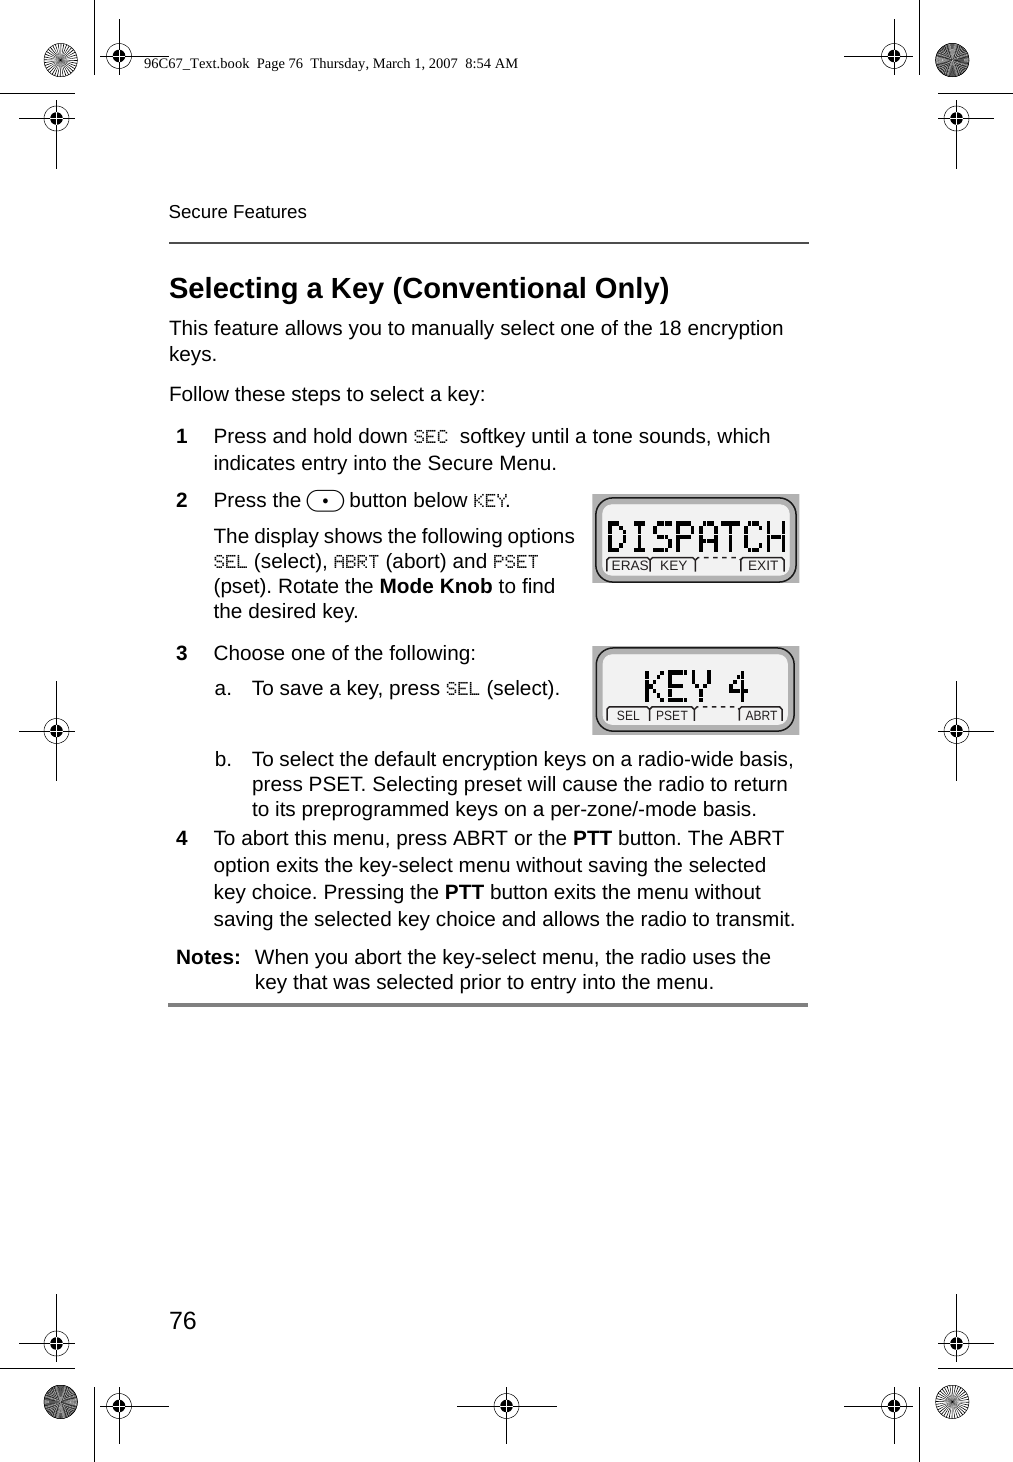 76Secure FeaturesSelecting a Key (Conventional Only)This feature allows you to manually select one of the 18 encryption keys.Follow these steps to select a key:1Press and hold down SEC softkey until a tone sounds, which indicates entry into the Secure Menu.2Press the m button below KEY. The display shows the following options SEL (select), ABRT (abort) and PSET (pset). Rotate the Mode Knob to find the desired key.3Choose one of the following:a. To save a key, press SEL (select).b. To select the default encryption keys on a radio-wide basis, press PSET. Selecting preset will cause the radio to return to its preprogrammed keys on a per-zone/-mode basis. 4To abort this menu, press ABRT or the PTT button. The ABRT option exits the key-select menu without saving the selected key choice. Pressing the PTT button exits the menu without saving the selected key choice and allows the radio to transmit.Notes: When you abort the key-select menu, the radio uses the key that was selected prior to entry into the menu. ERAS   KEY                EXITSEL     PSET         ABRT96C67_Text.book  Page 76  Thursday, March 1, 2007  8:54 AM